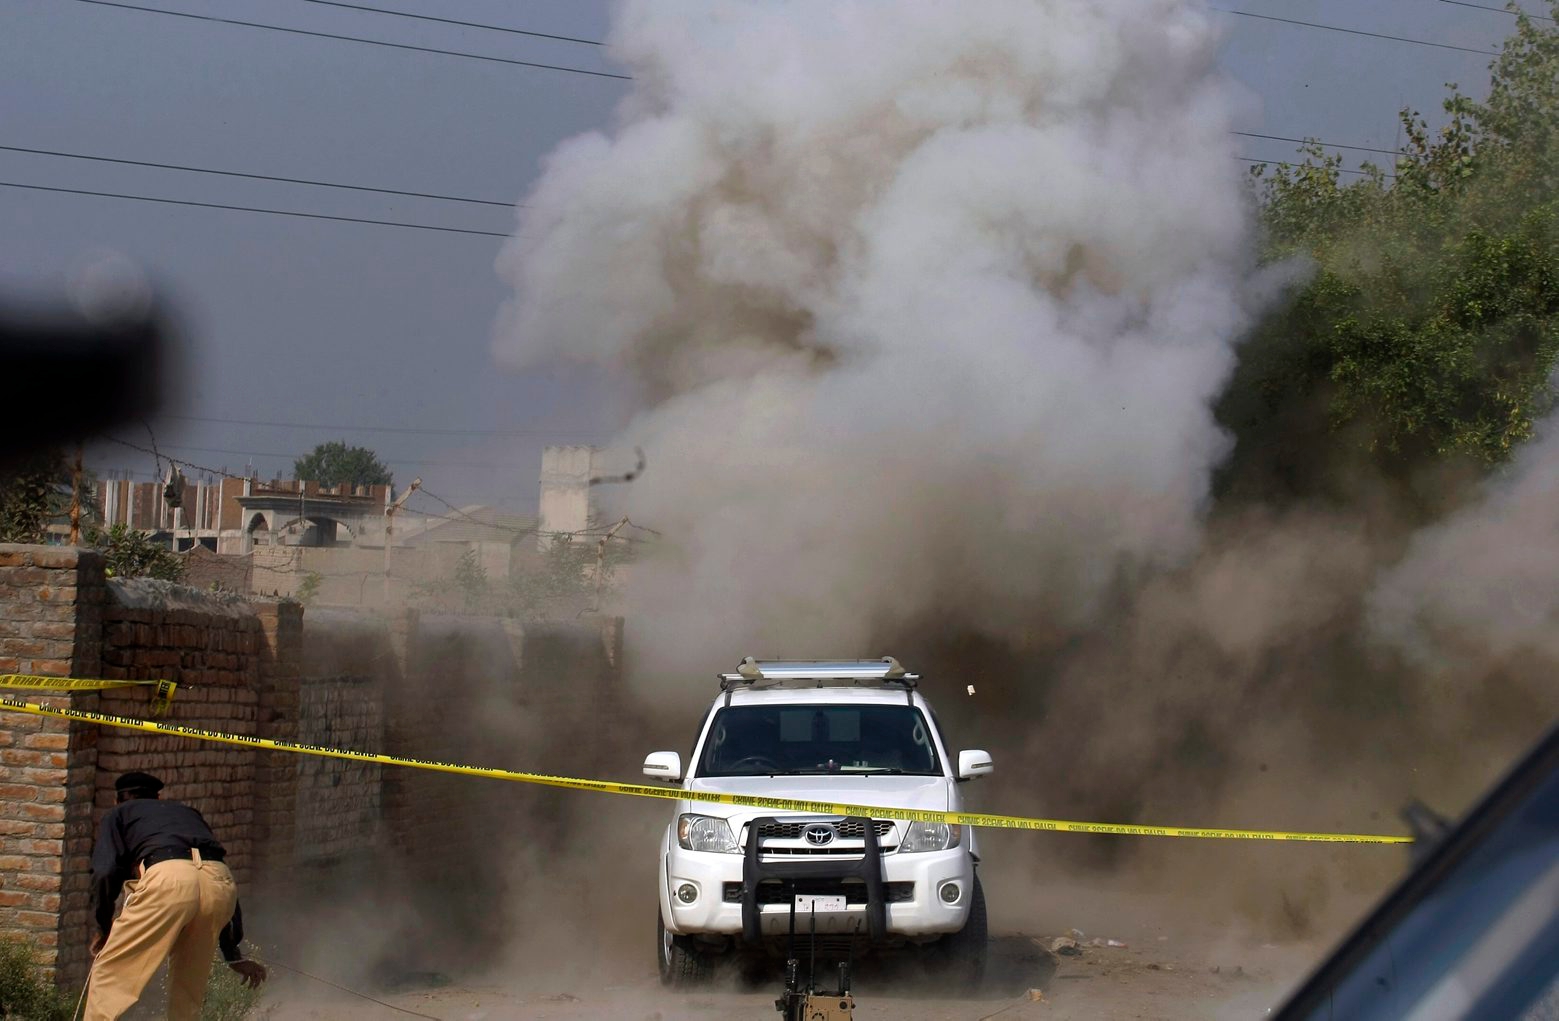 Dust and smoke rises after a bomb is detonated in by a bomb disposal squad on the outskirts of Peshawar, Pakistan, Tuesday, Oct. 25, 2016. Earlier a roadside bomb targeted a police patrol on guard for a polio vaccination team on the outskirts of Peshawar, killing one policeman, according to Superintendent of Police Furqan Bilal, who himself narrowly escaped. He said there were more improvised explosives devices buried in the area. (AP Photo/Muhammad Sajjad) Pakistan